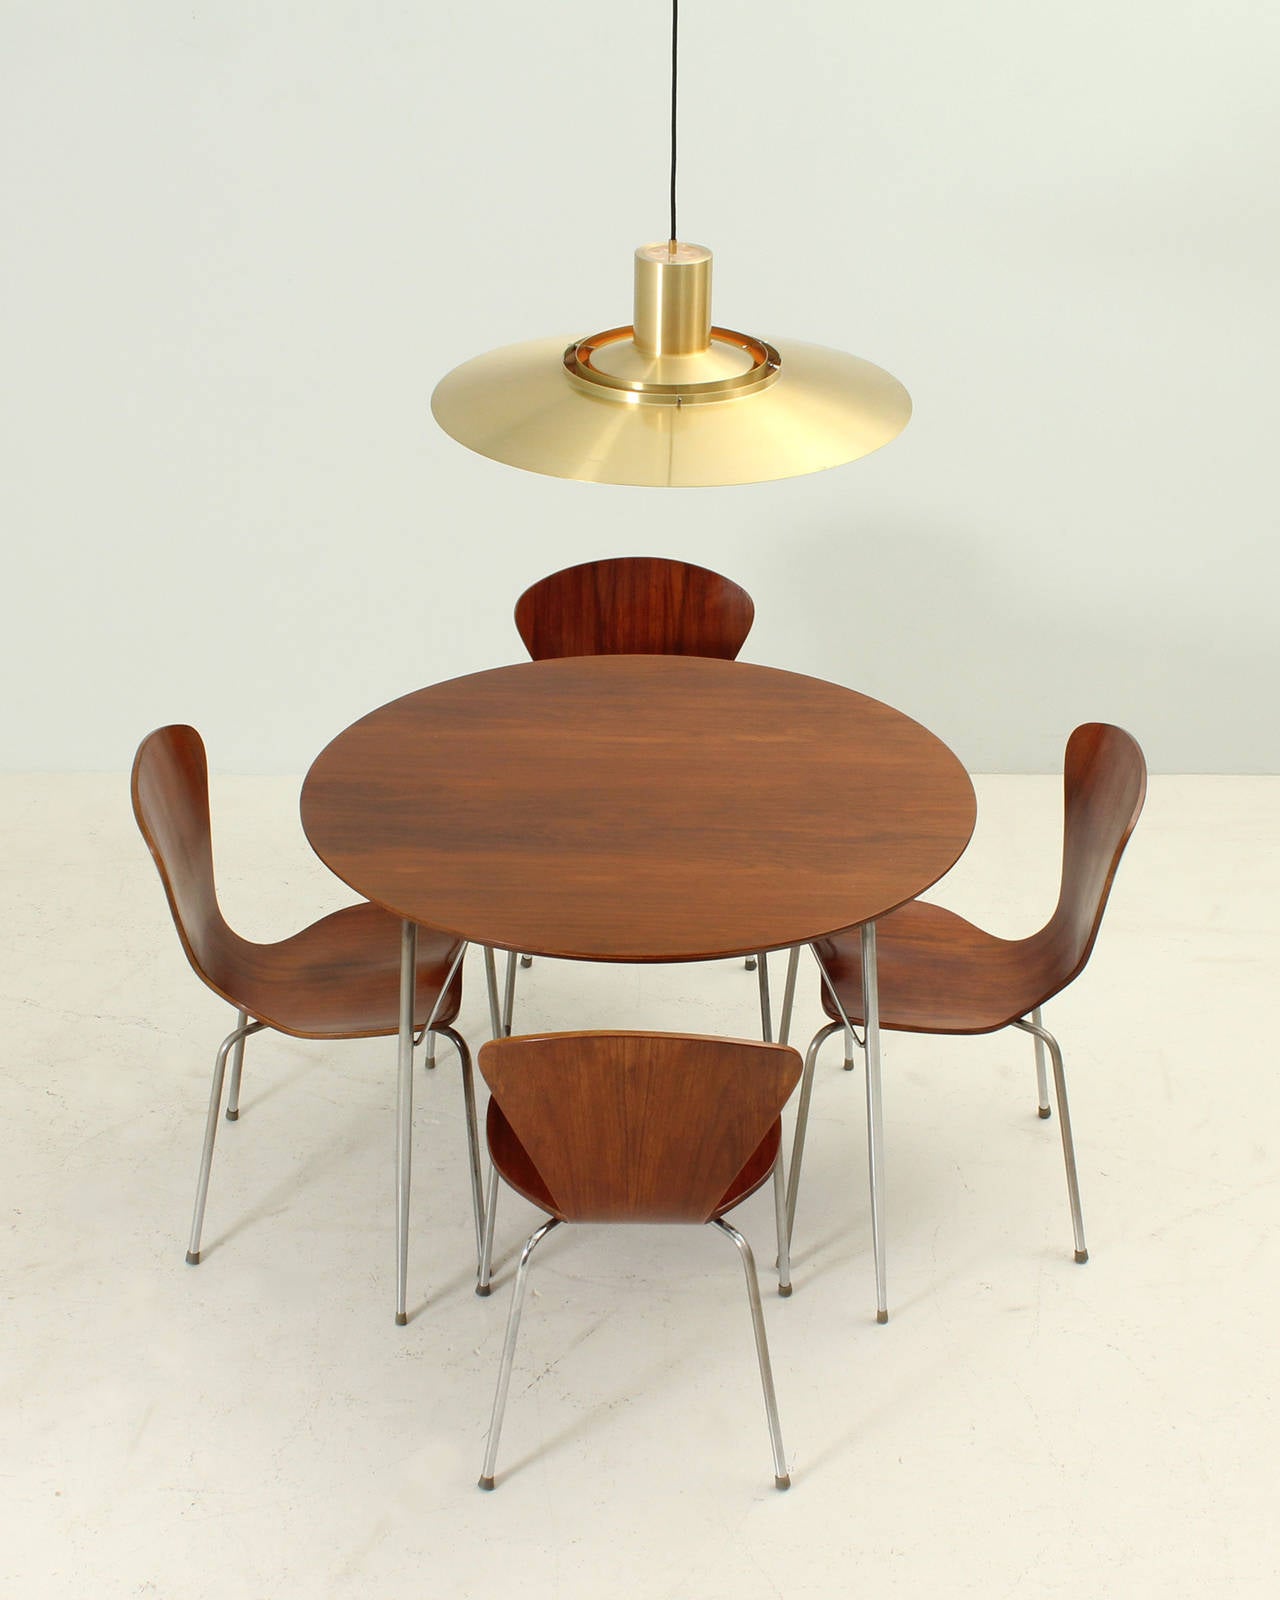 Rosewood dining set sold in 1950's in Campo & Graffi shop Home in Torino, Italy. This table, similar to the Arne Jacobsen table was imported only the top of the table from Denmark and the base is a Campo & Graffi design with the characteristic